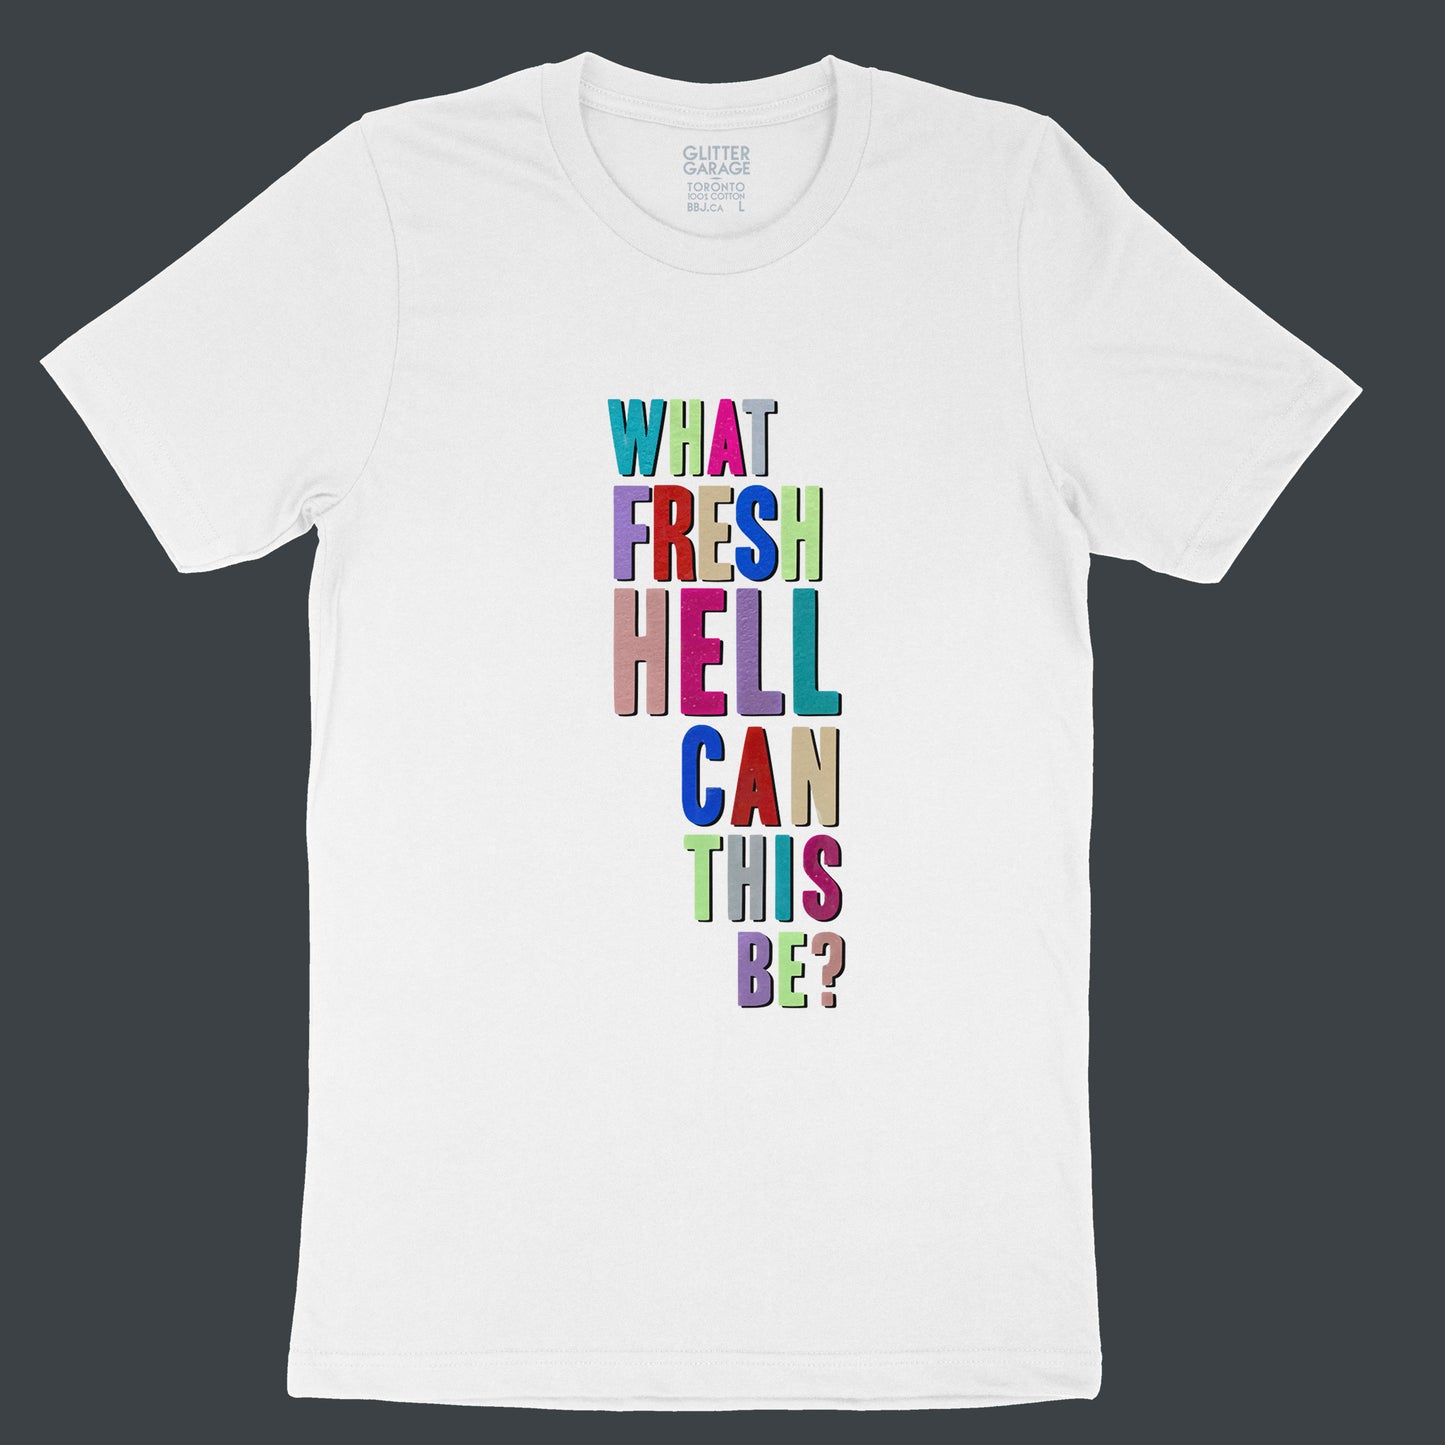 White unisex tee shirt with multicolour metallic text "what fresh hell can this be?" by BBJ / Glitter Garage